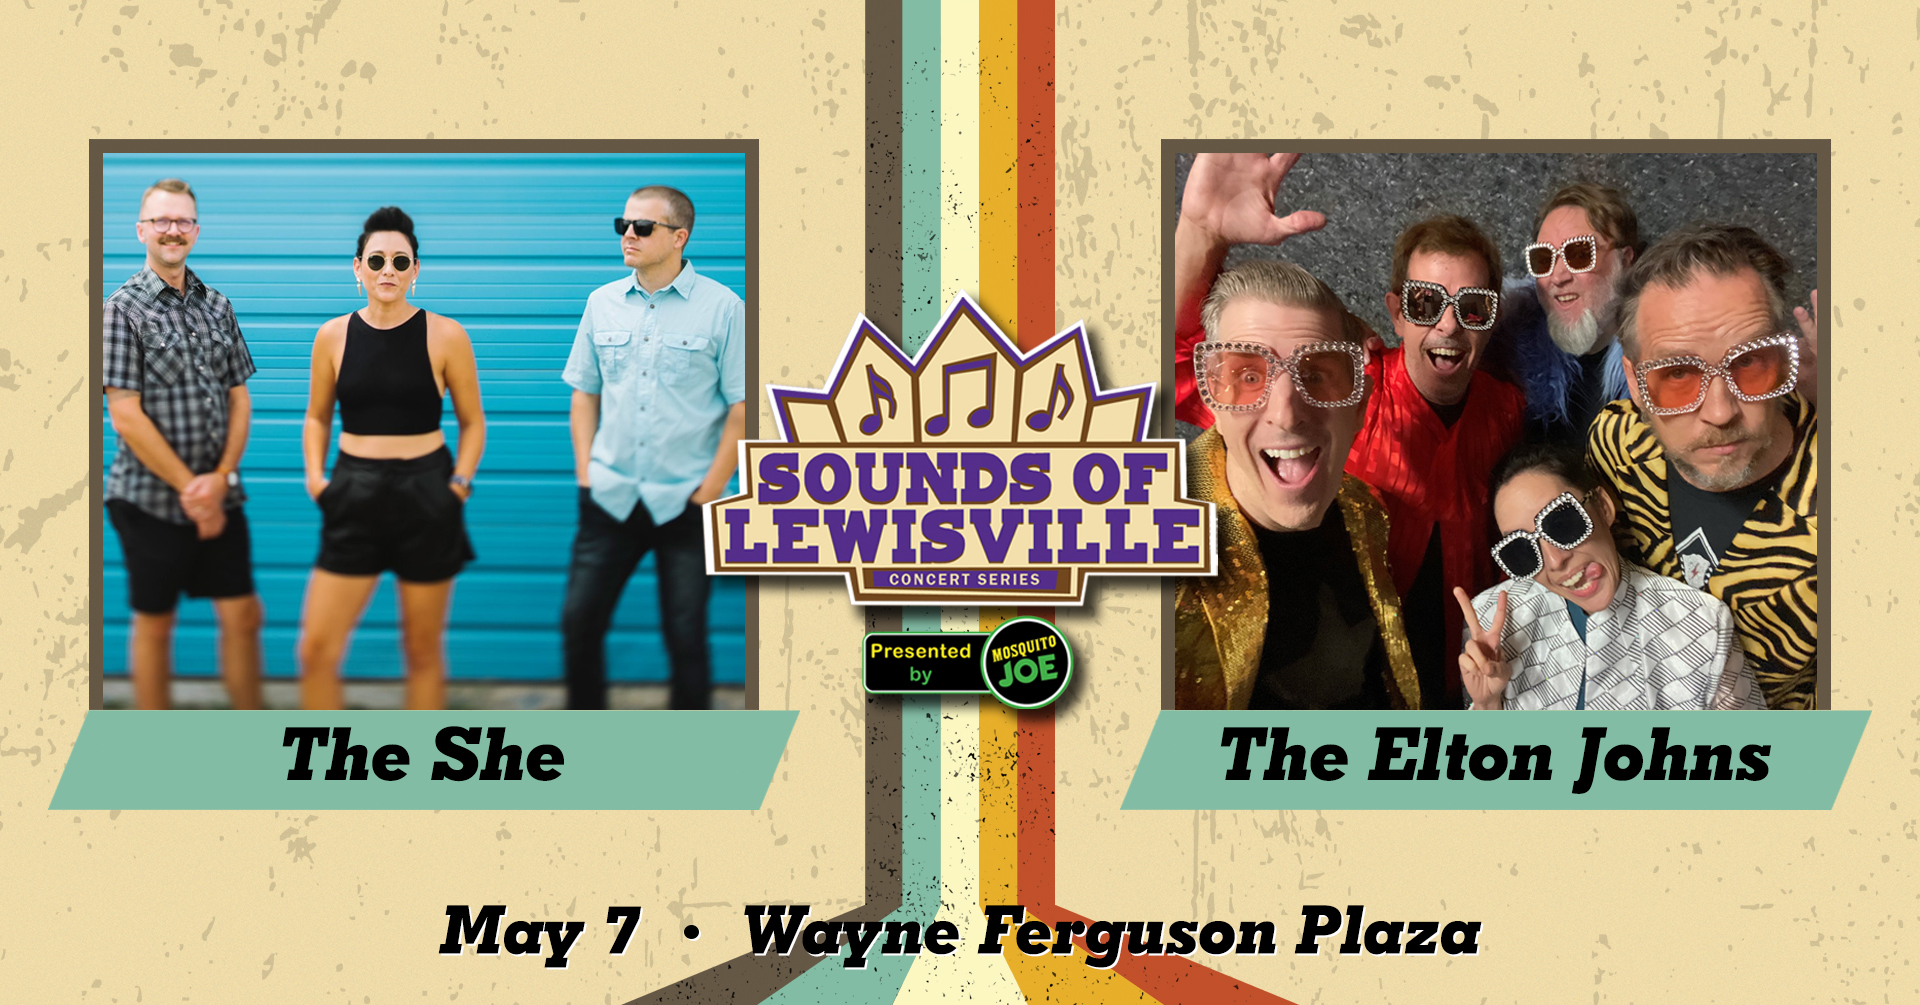 Sounds of Lewisville - May 7 concert